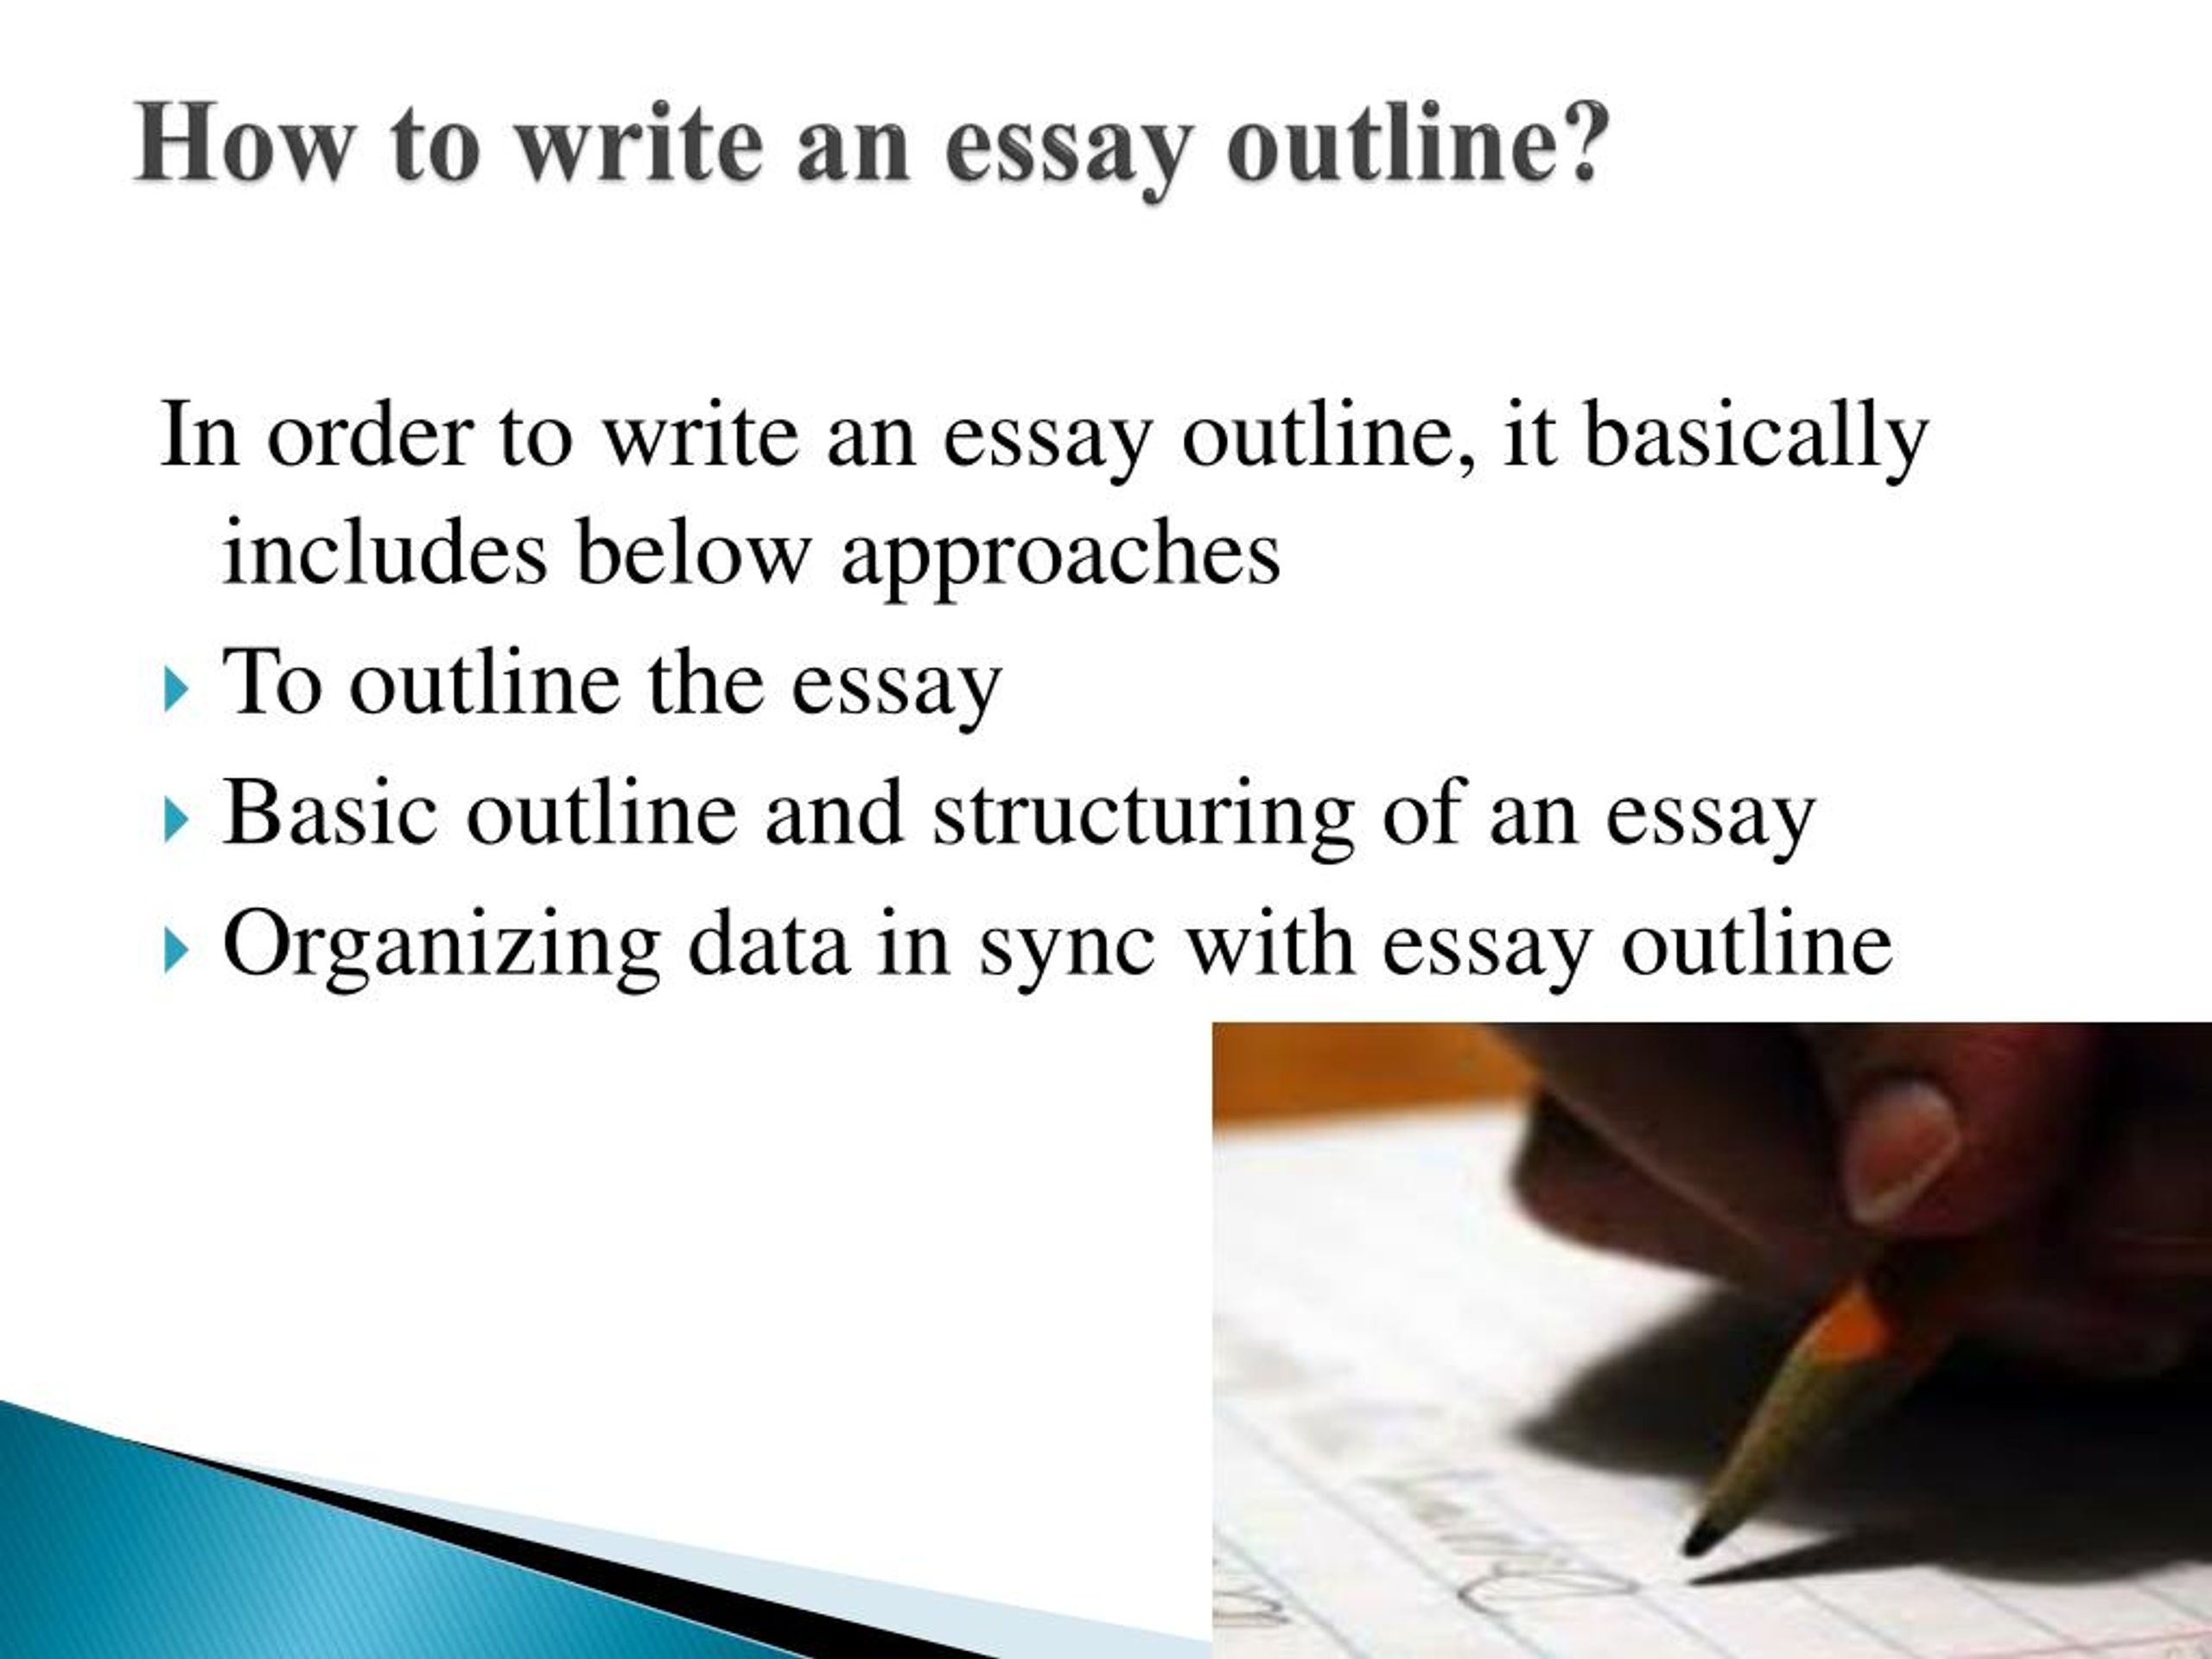 how can we write essay outline